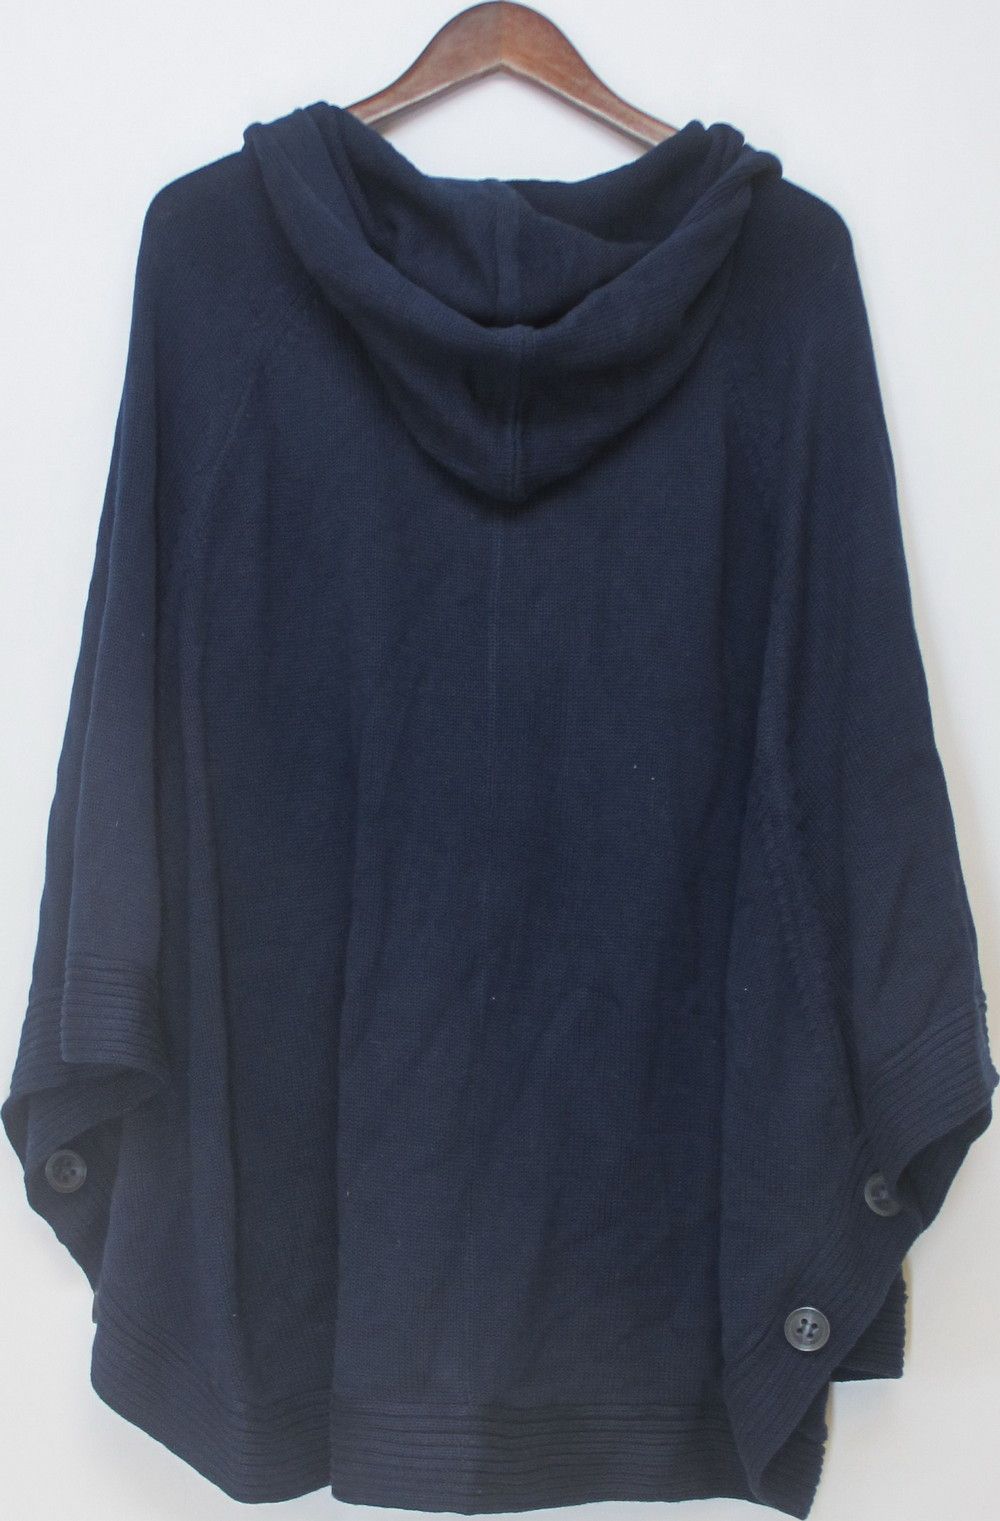 Queen Latifah Collection Hooded Poncho Navy Blue Sz 2X NEW 2nd HH36 16